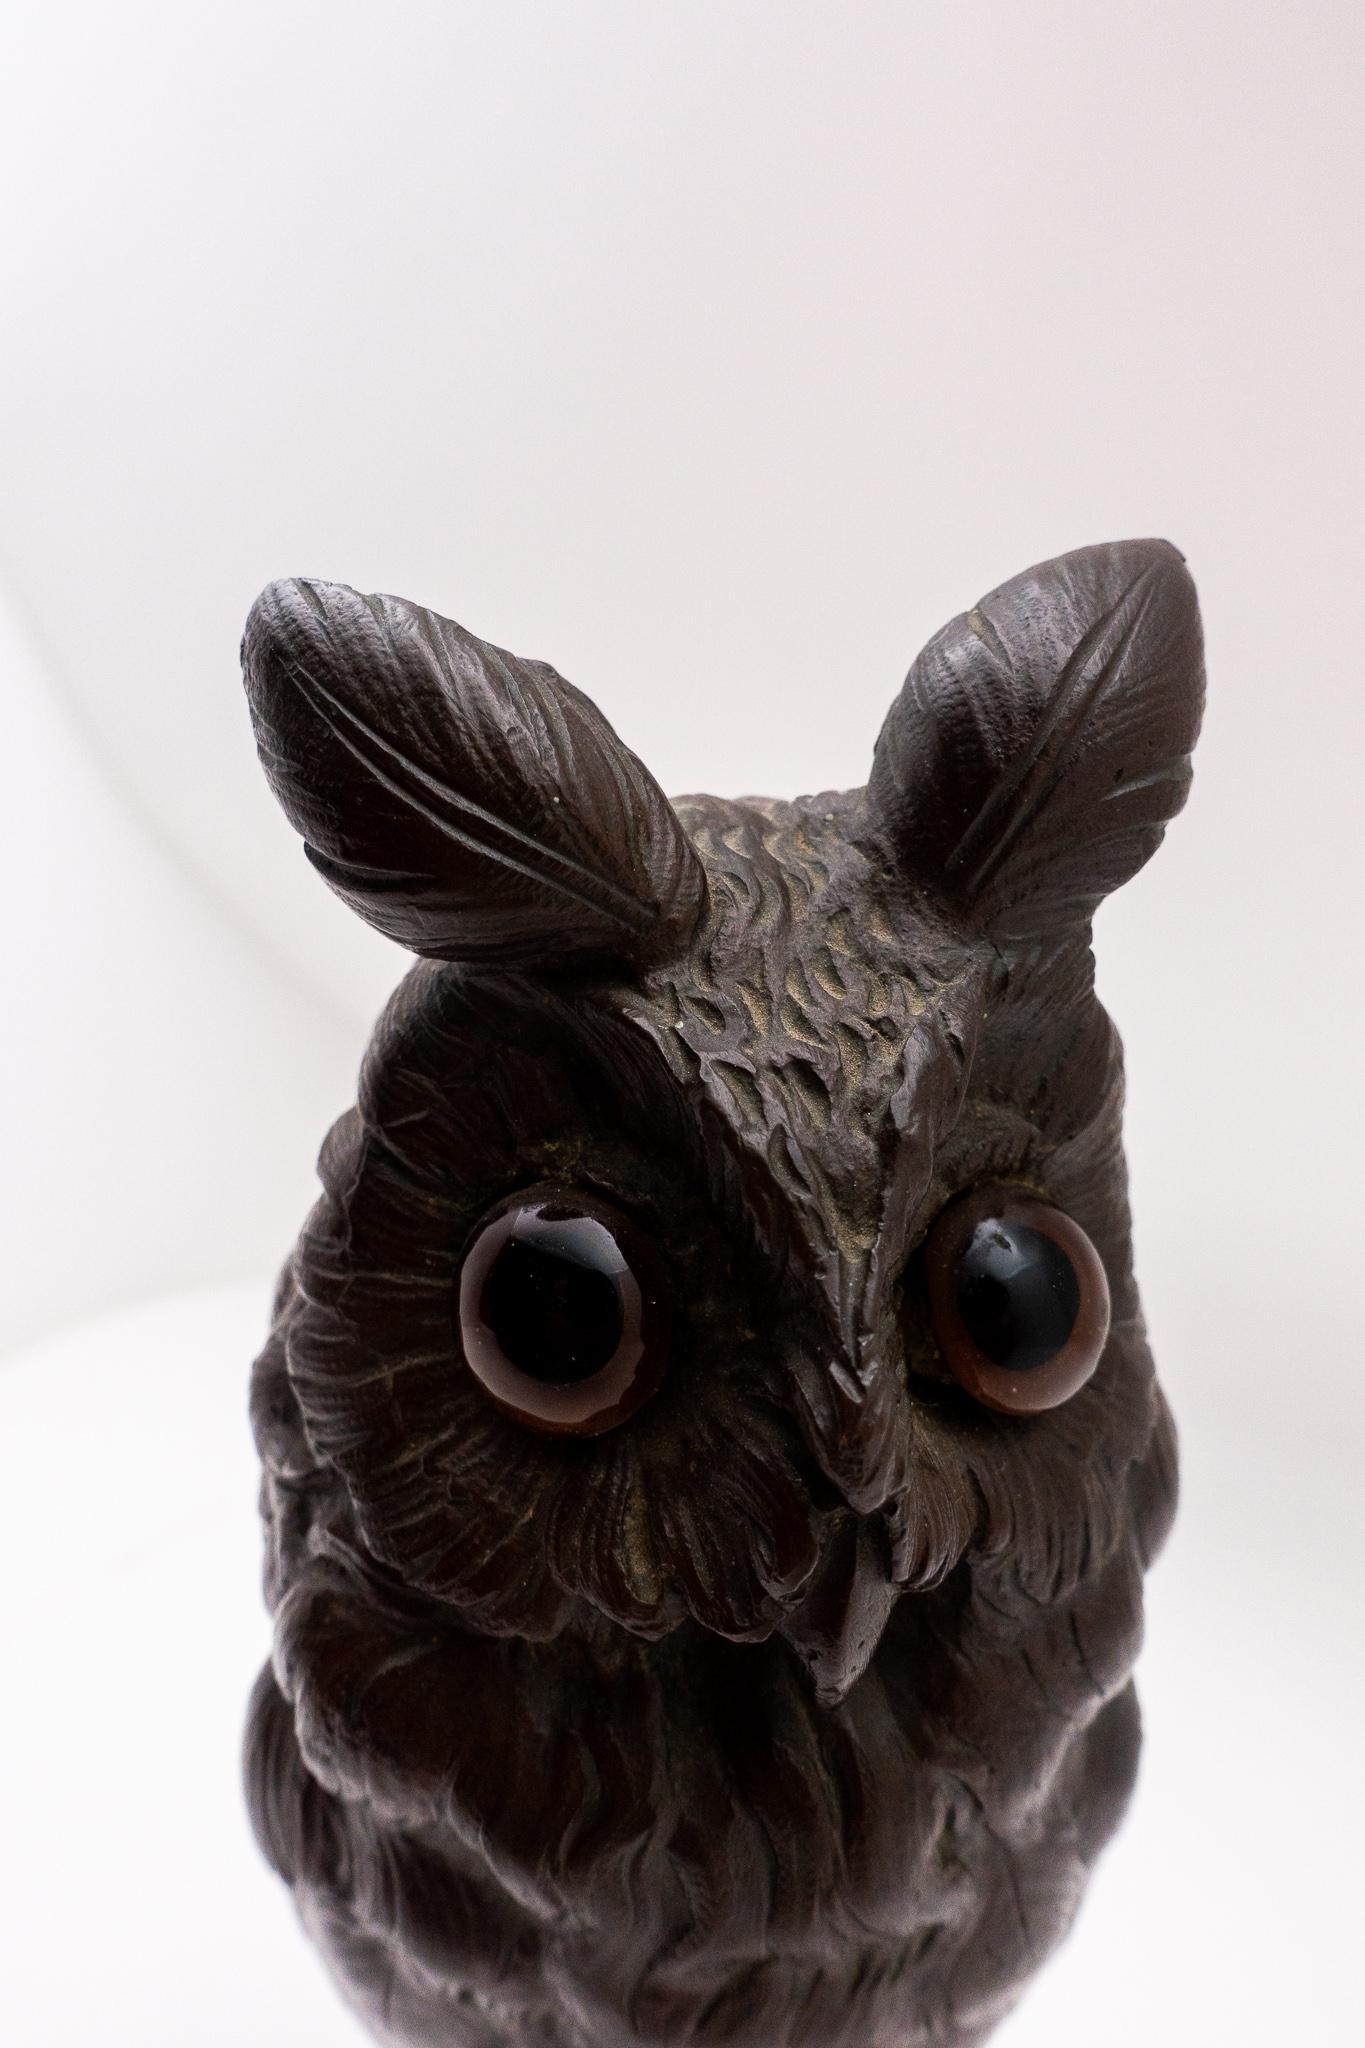 Bronze 19th Century Sculpture of Perched Owl, by L. Frouin 'Signed' 2